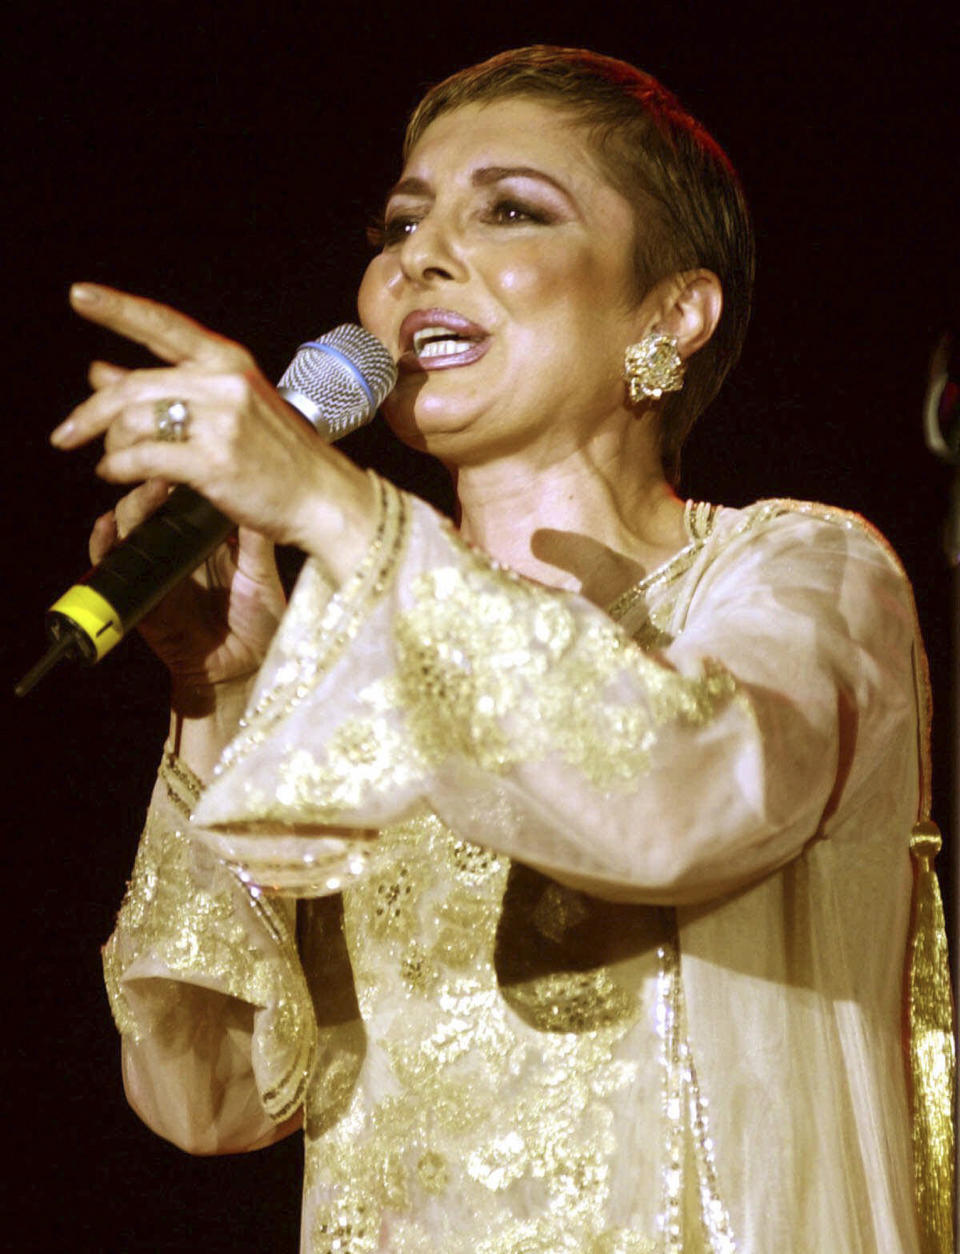 FILE - In this March 21, 2001 file photo Iranian pop star Googoosh performs during a concert in Dubai, United Arab Emirates. Googoosh has released a video that addresses homosexual love, a major gesture by one of the country's top cultural figures in exile, causing shockwaves in the Islamic republic. Googoosh sings "don’t tell me to stop loving: you can’t do that and I can’t either." Googoosh was Iran's first pop diva, though the 1979 revolution ended her live singing career for two decades until she immigrated to the West. Navid Akhavan, an Iranian-born German who wrote and directed the video for Googoosh’s song “Behesht” (Heaven), said it has been viewed by more than a million Iranians online or via illegal satellite channels since its Valentine’s Day release. (AP Photo/Kamran Jebreili, File)